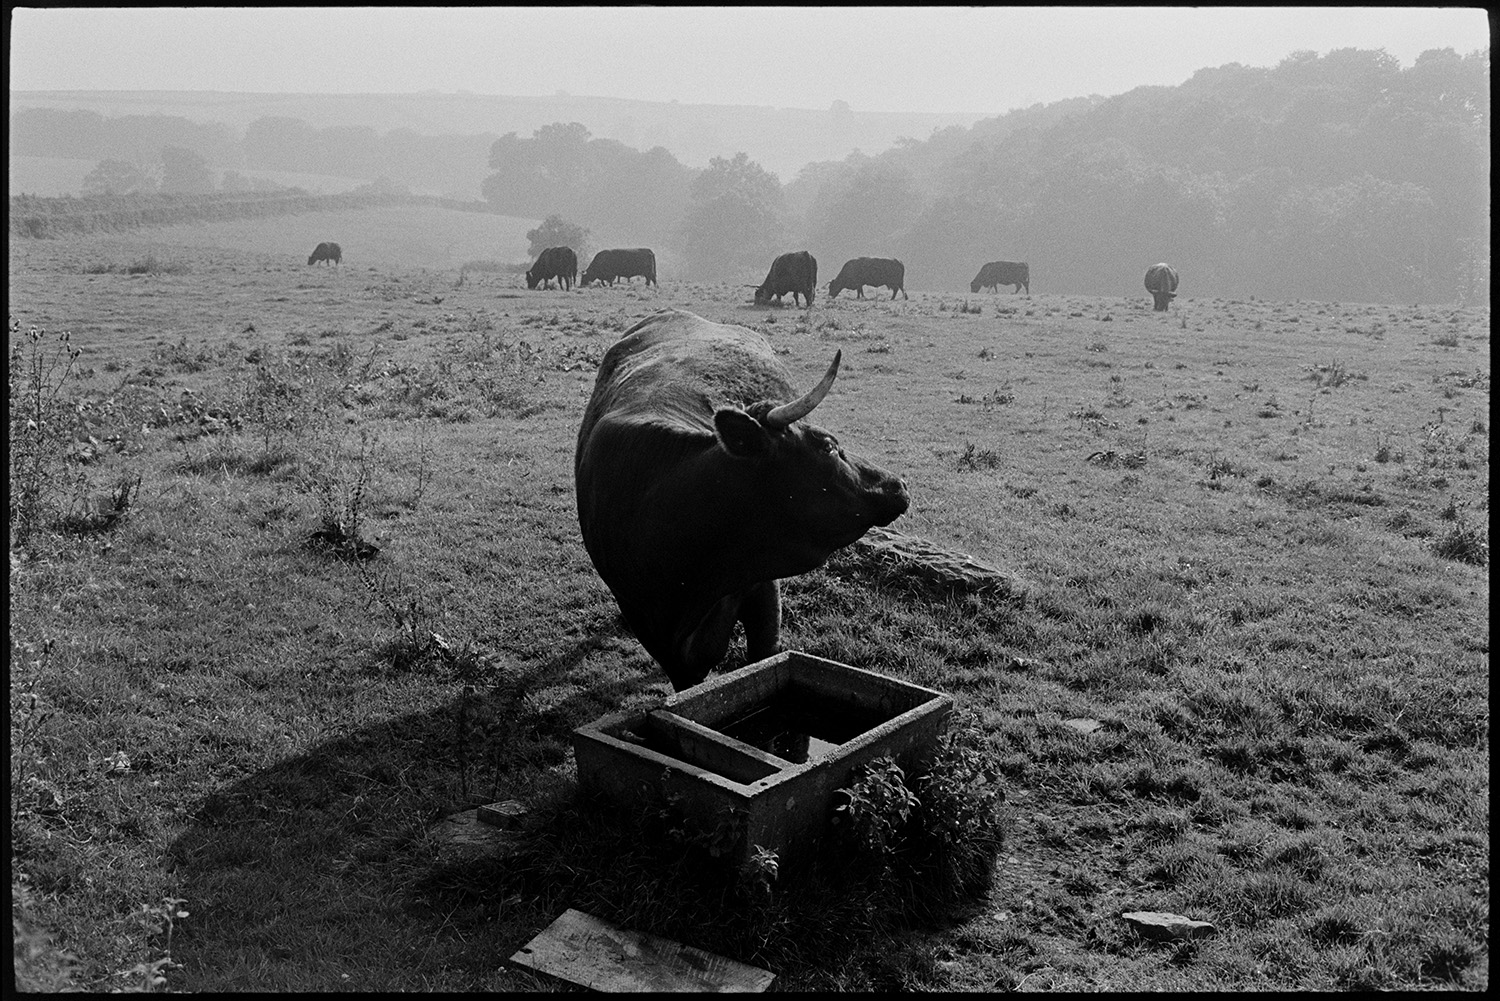 Horned Devon Red, early morning misty valley with trees. Drinking from water trough.
[A horned Red Devon cow drinking from a water trough in a field, in the early morning, at Narracott, Hollocombe. Other cattle can be seen grazing in the mist in the background and woodland is visible on the edge of the field.]